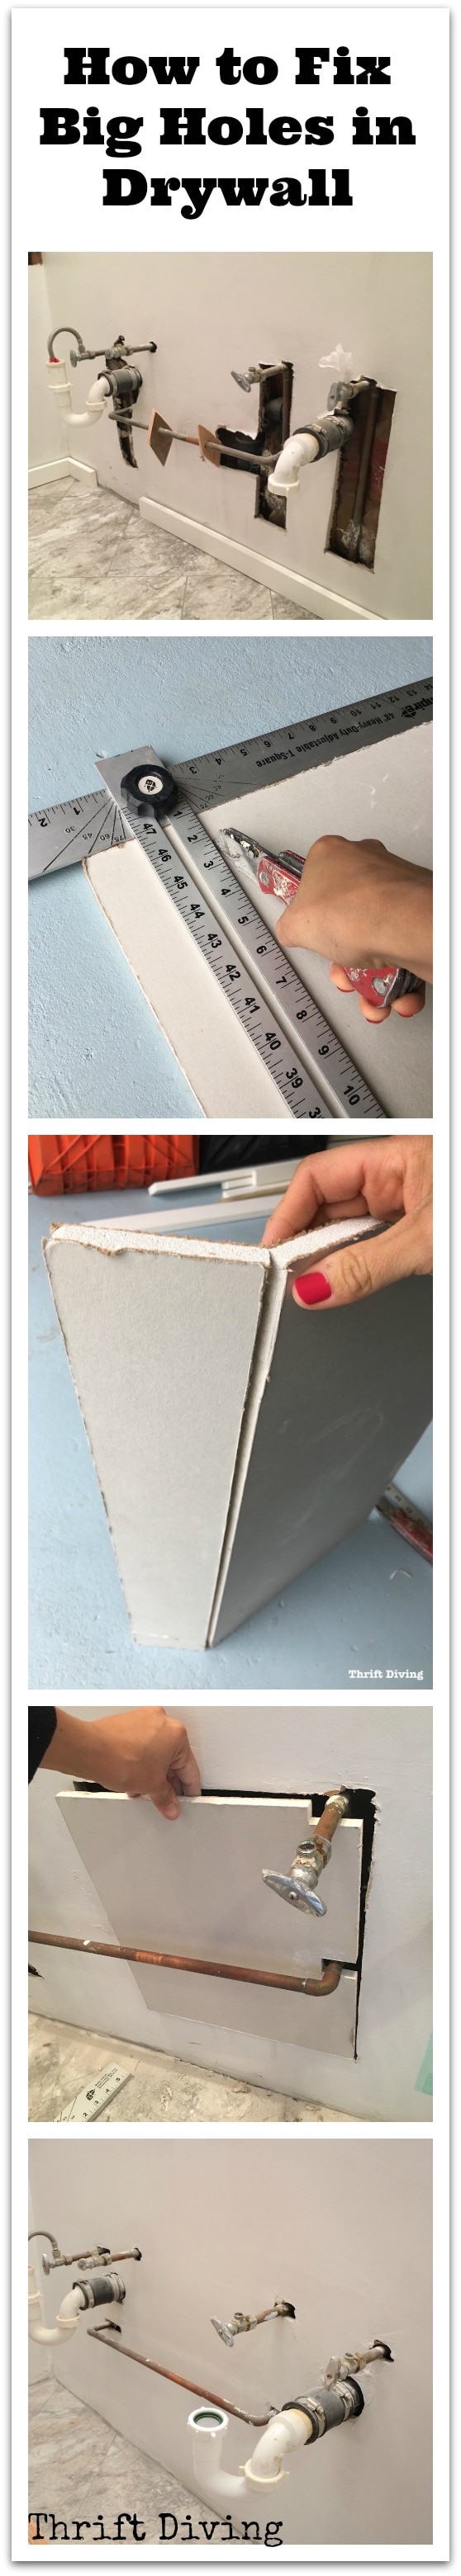 How to Fix Big Holes in Drywall - Drywall repair that will allow you to skip hiring a handyman or handywoman! - Thrift Diving